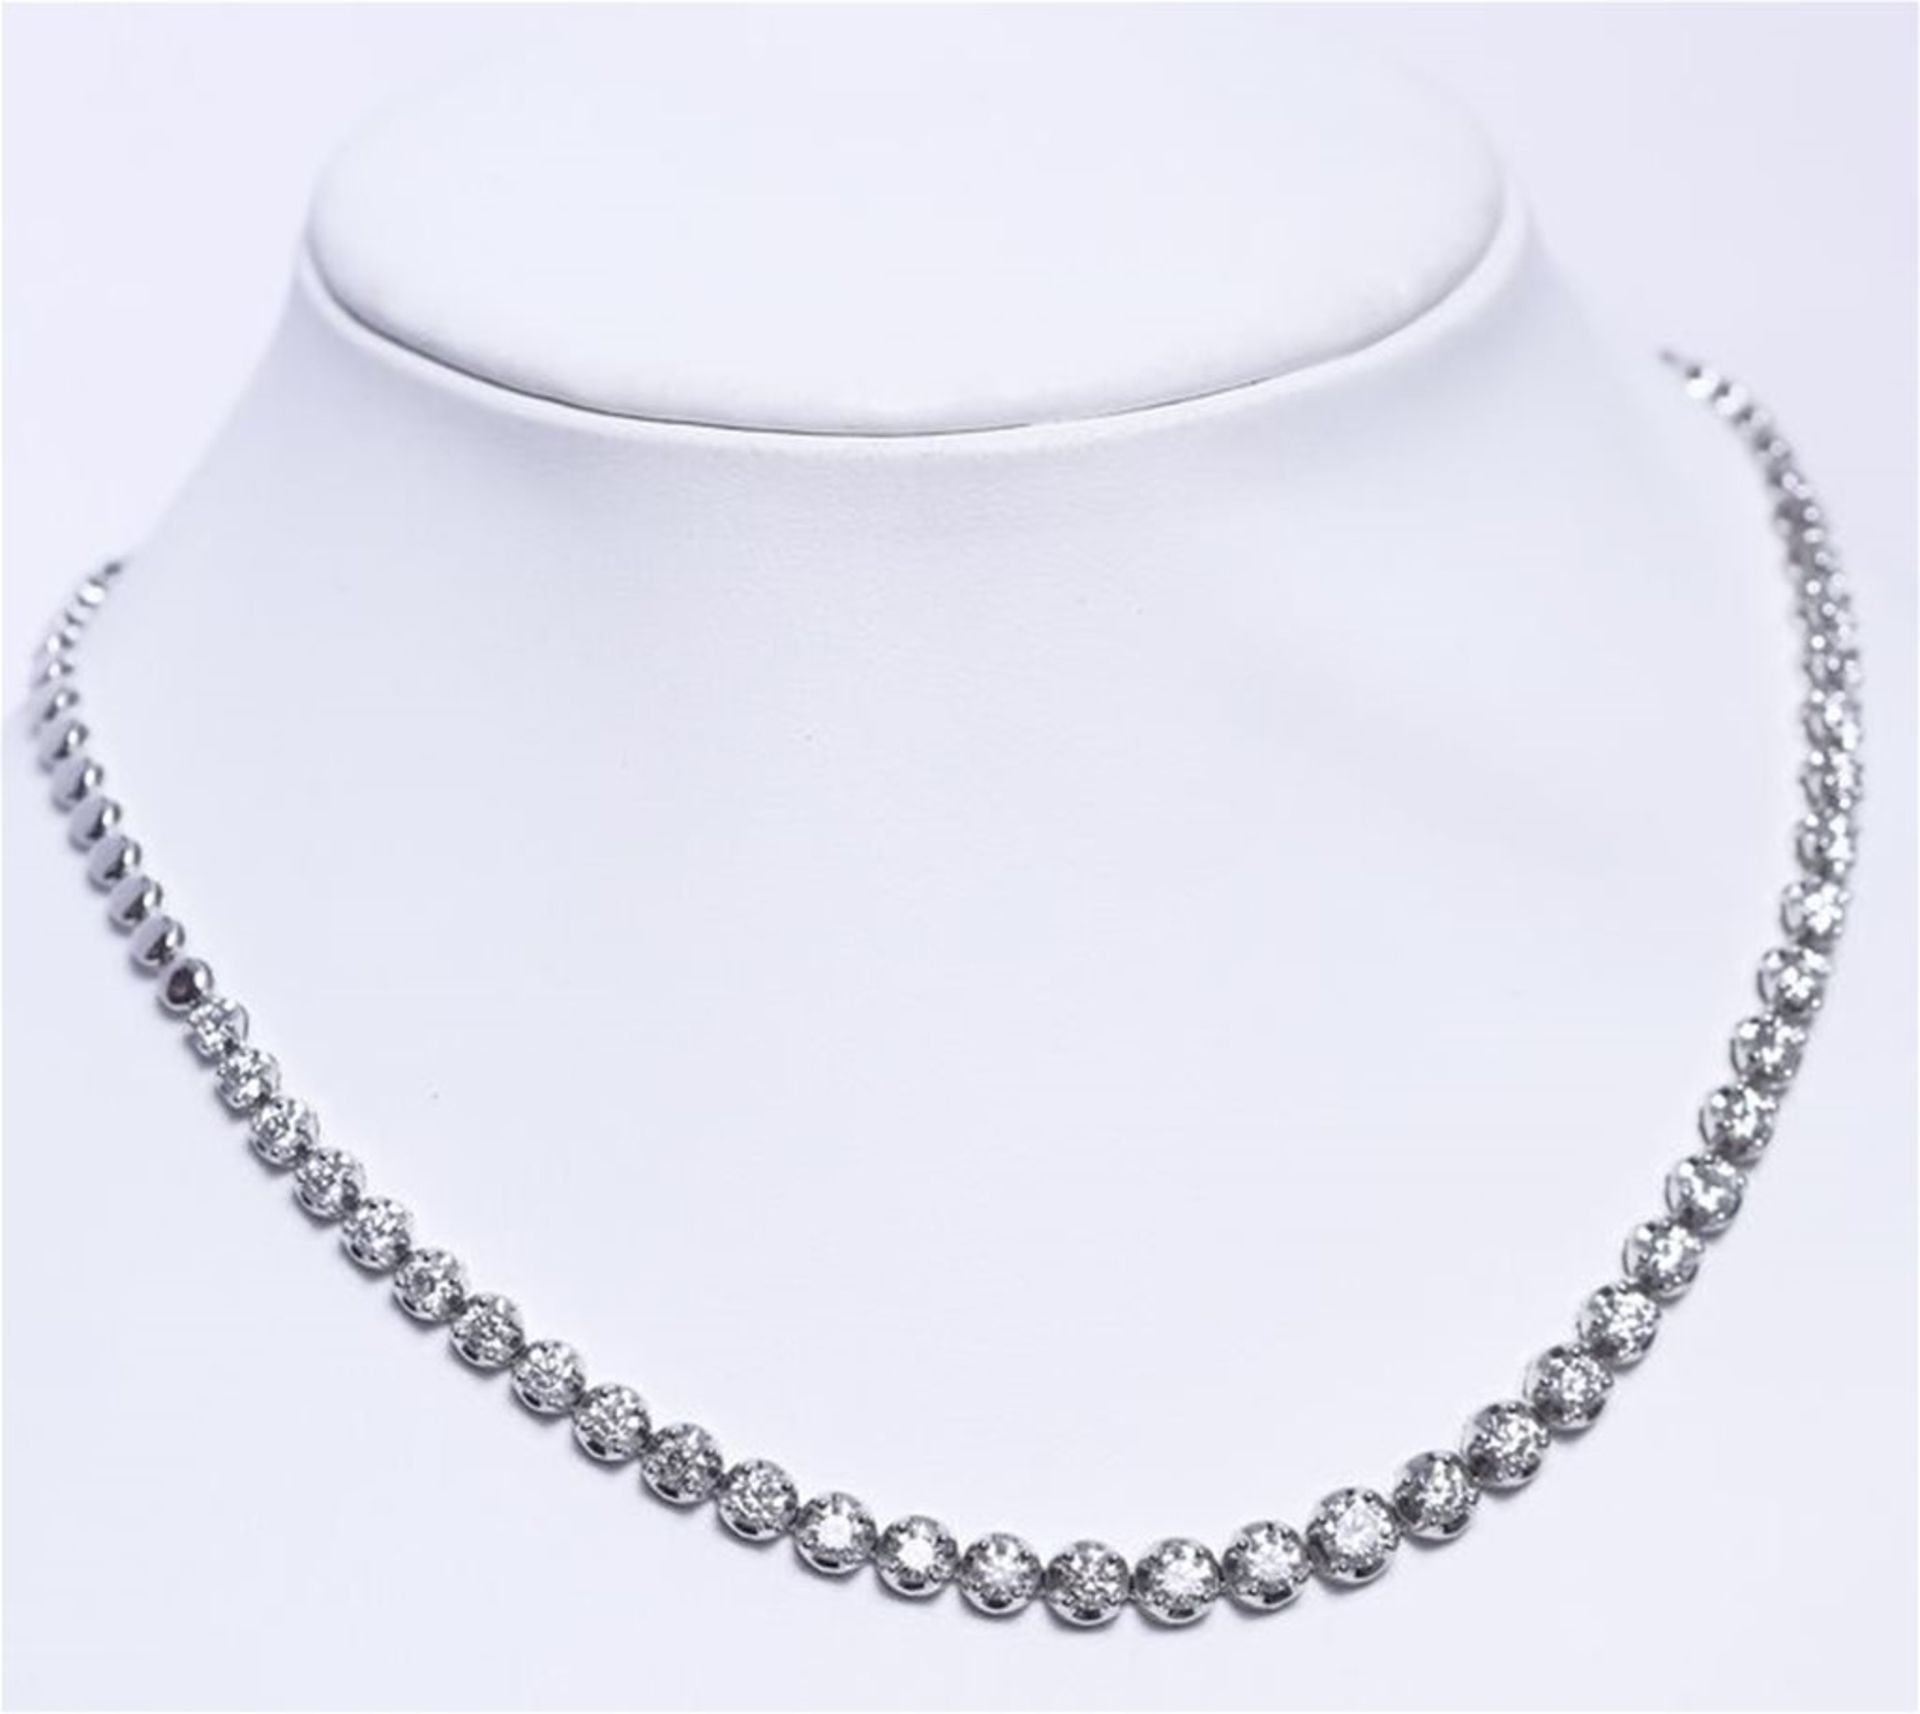 IGI Certified 14.83 ct. Solitaire Diamonds String Necklace with matching Diamond Drop Earrings